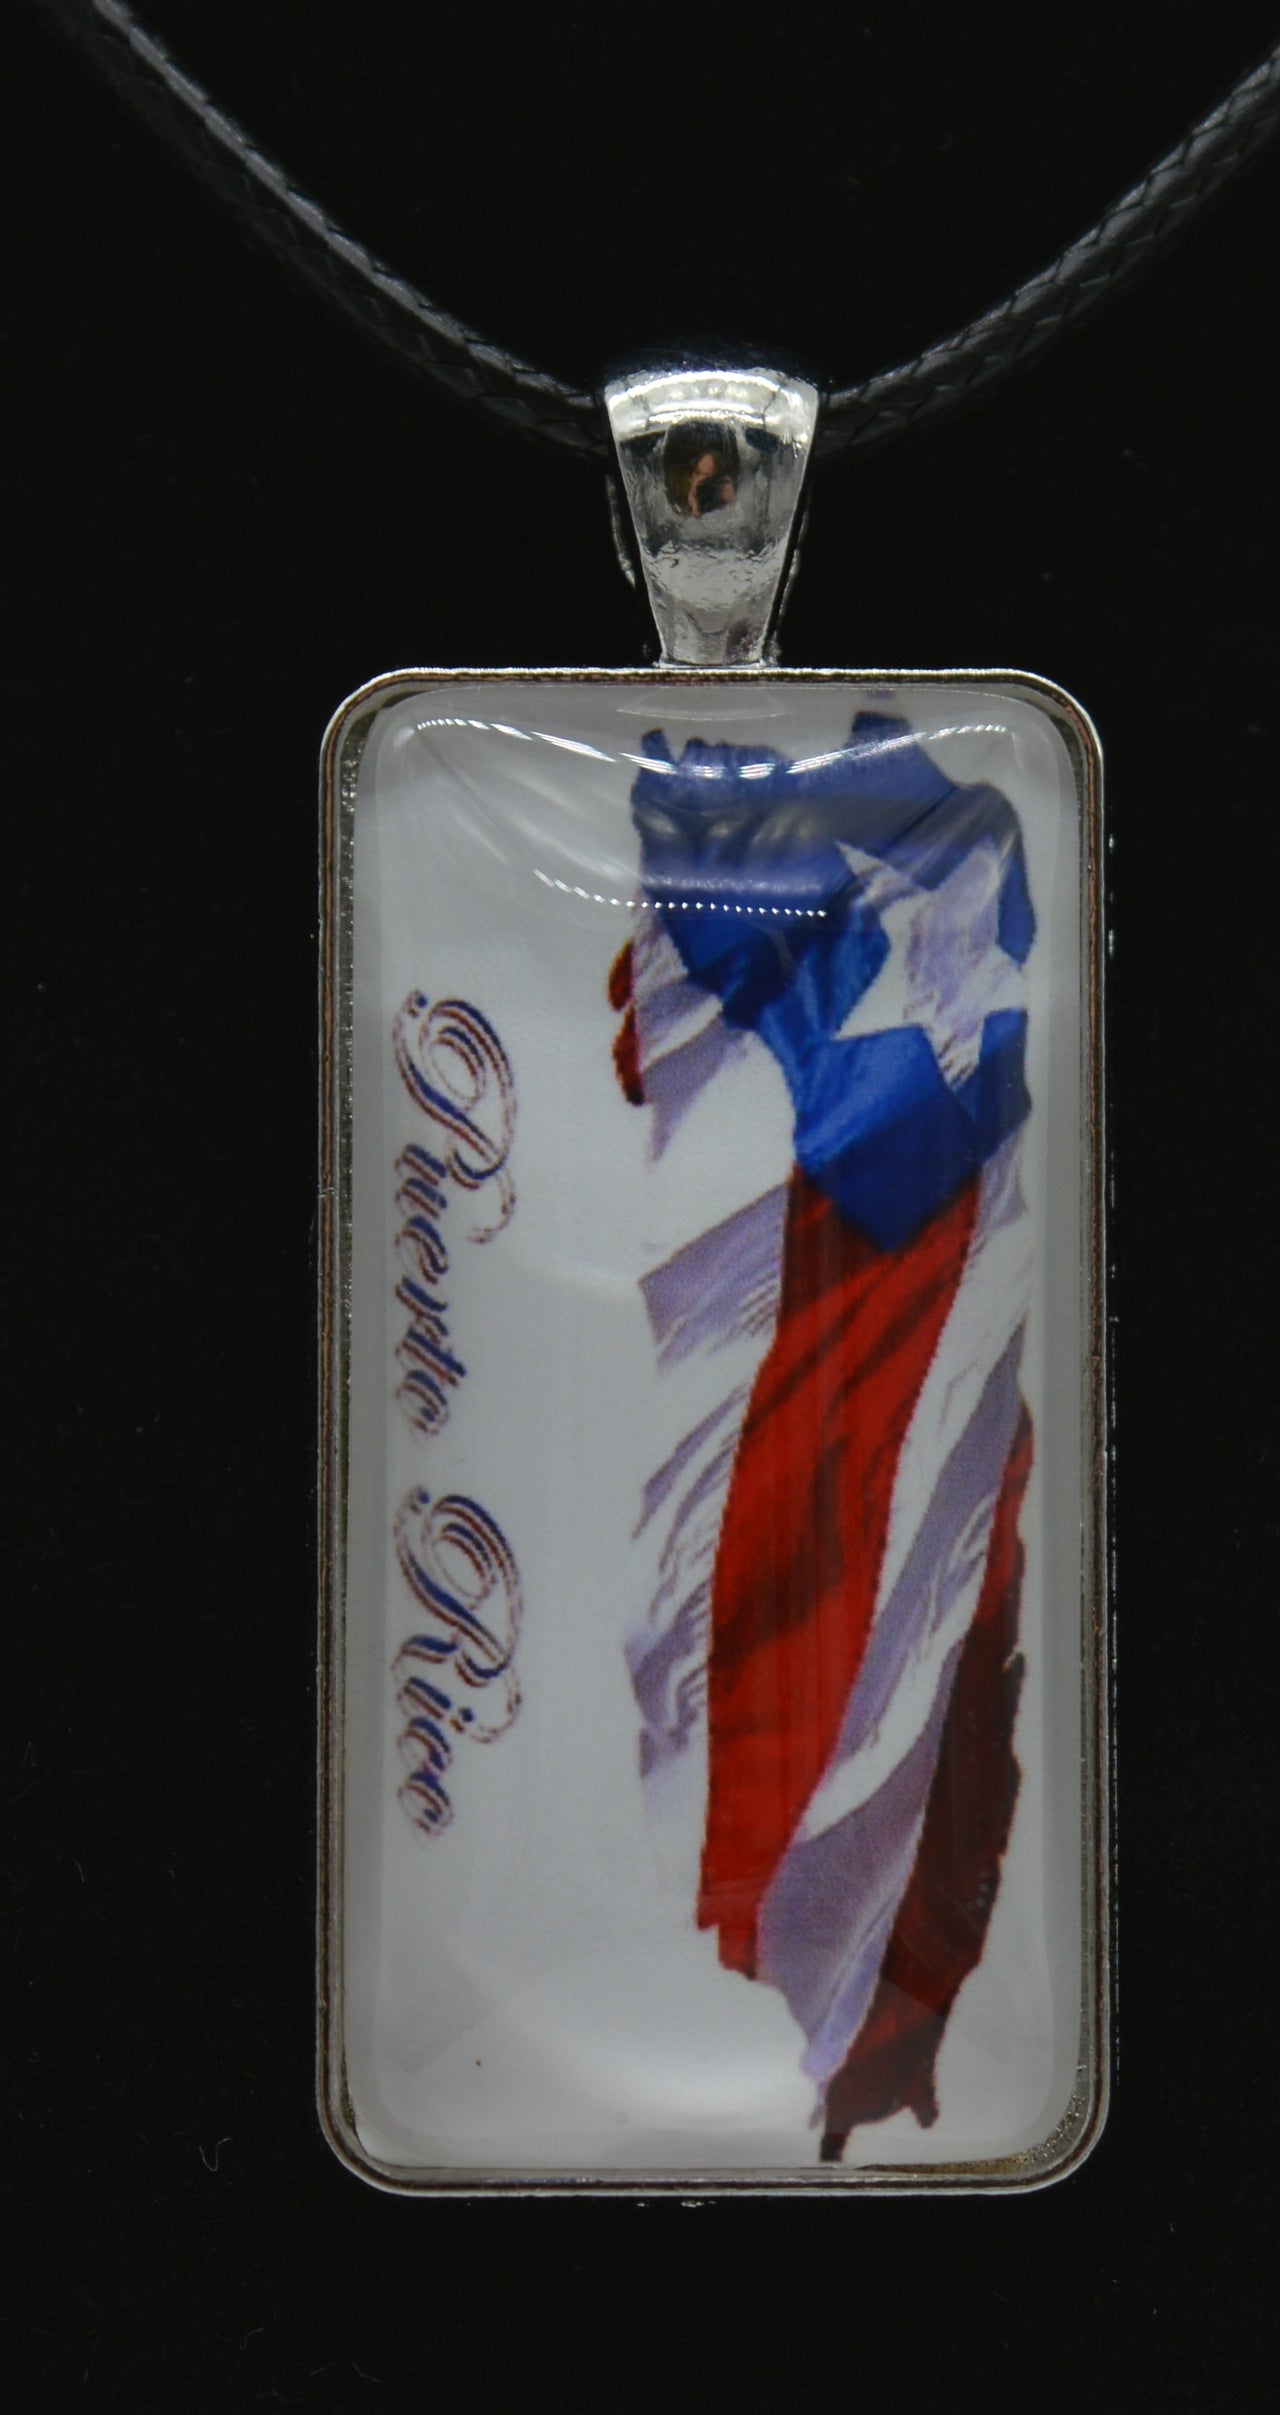 Puerto Rico Rope Waving Flag Necklace